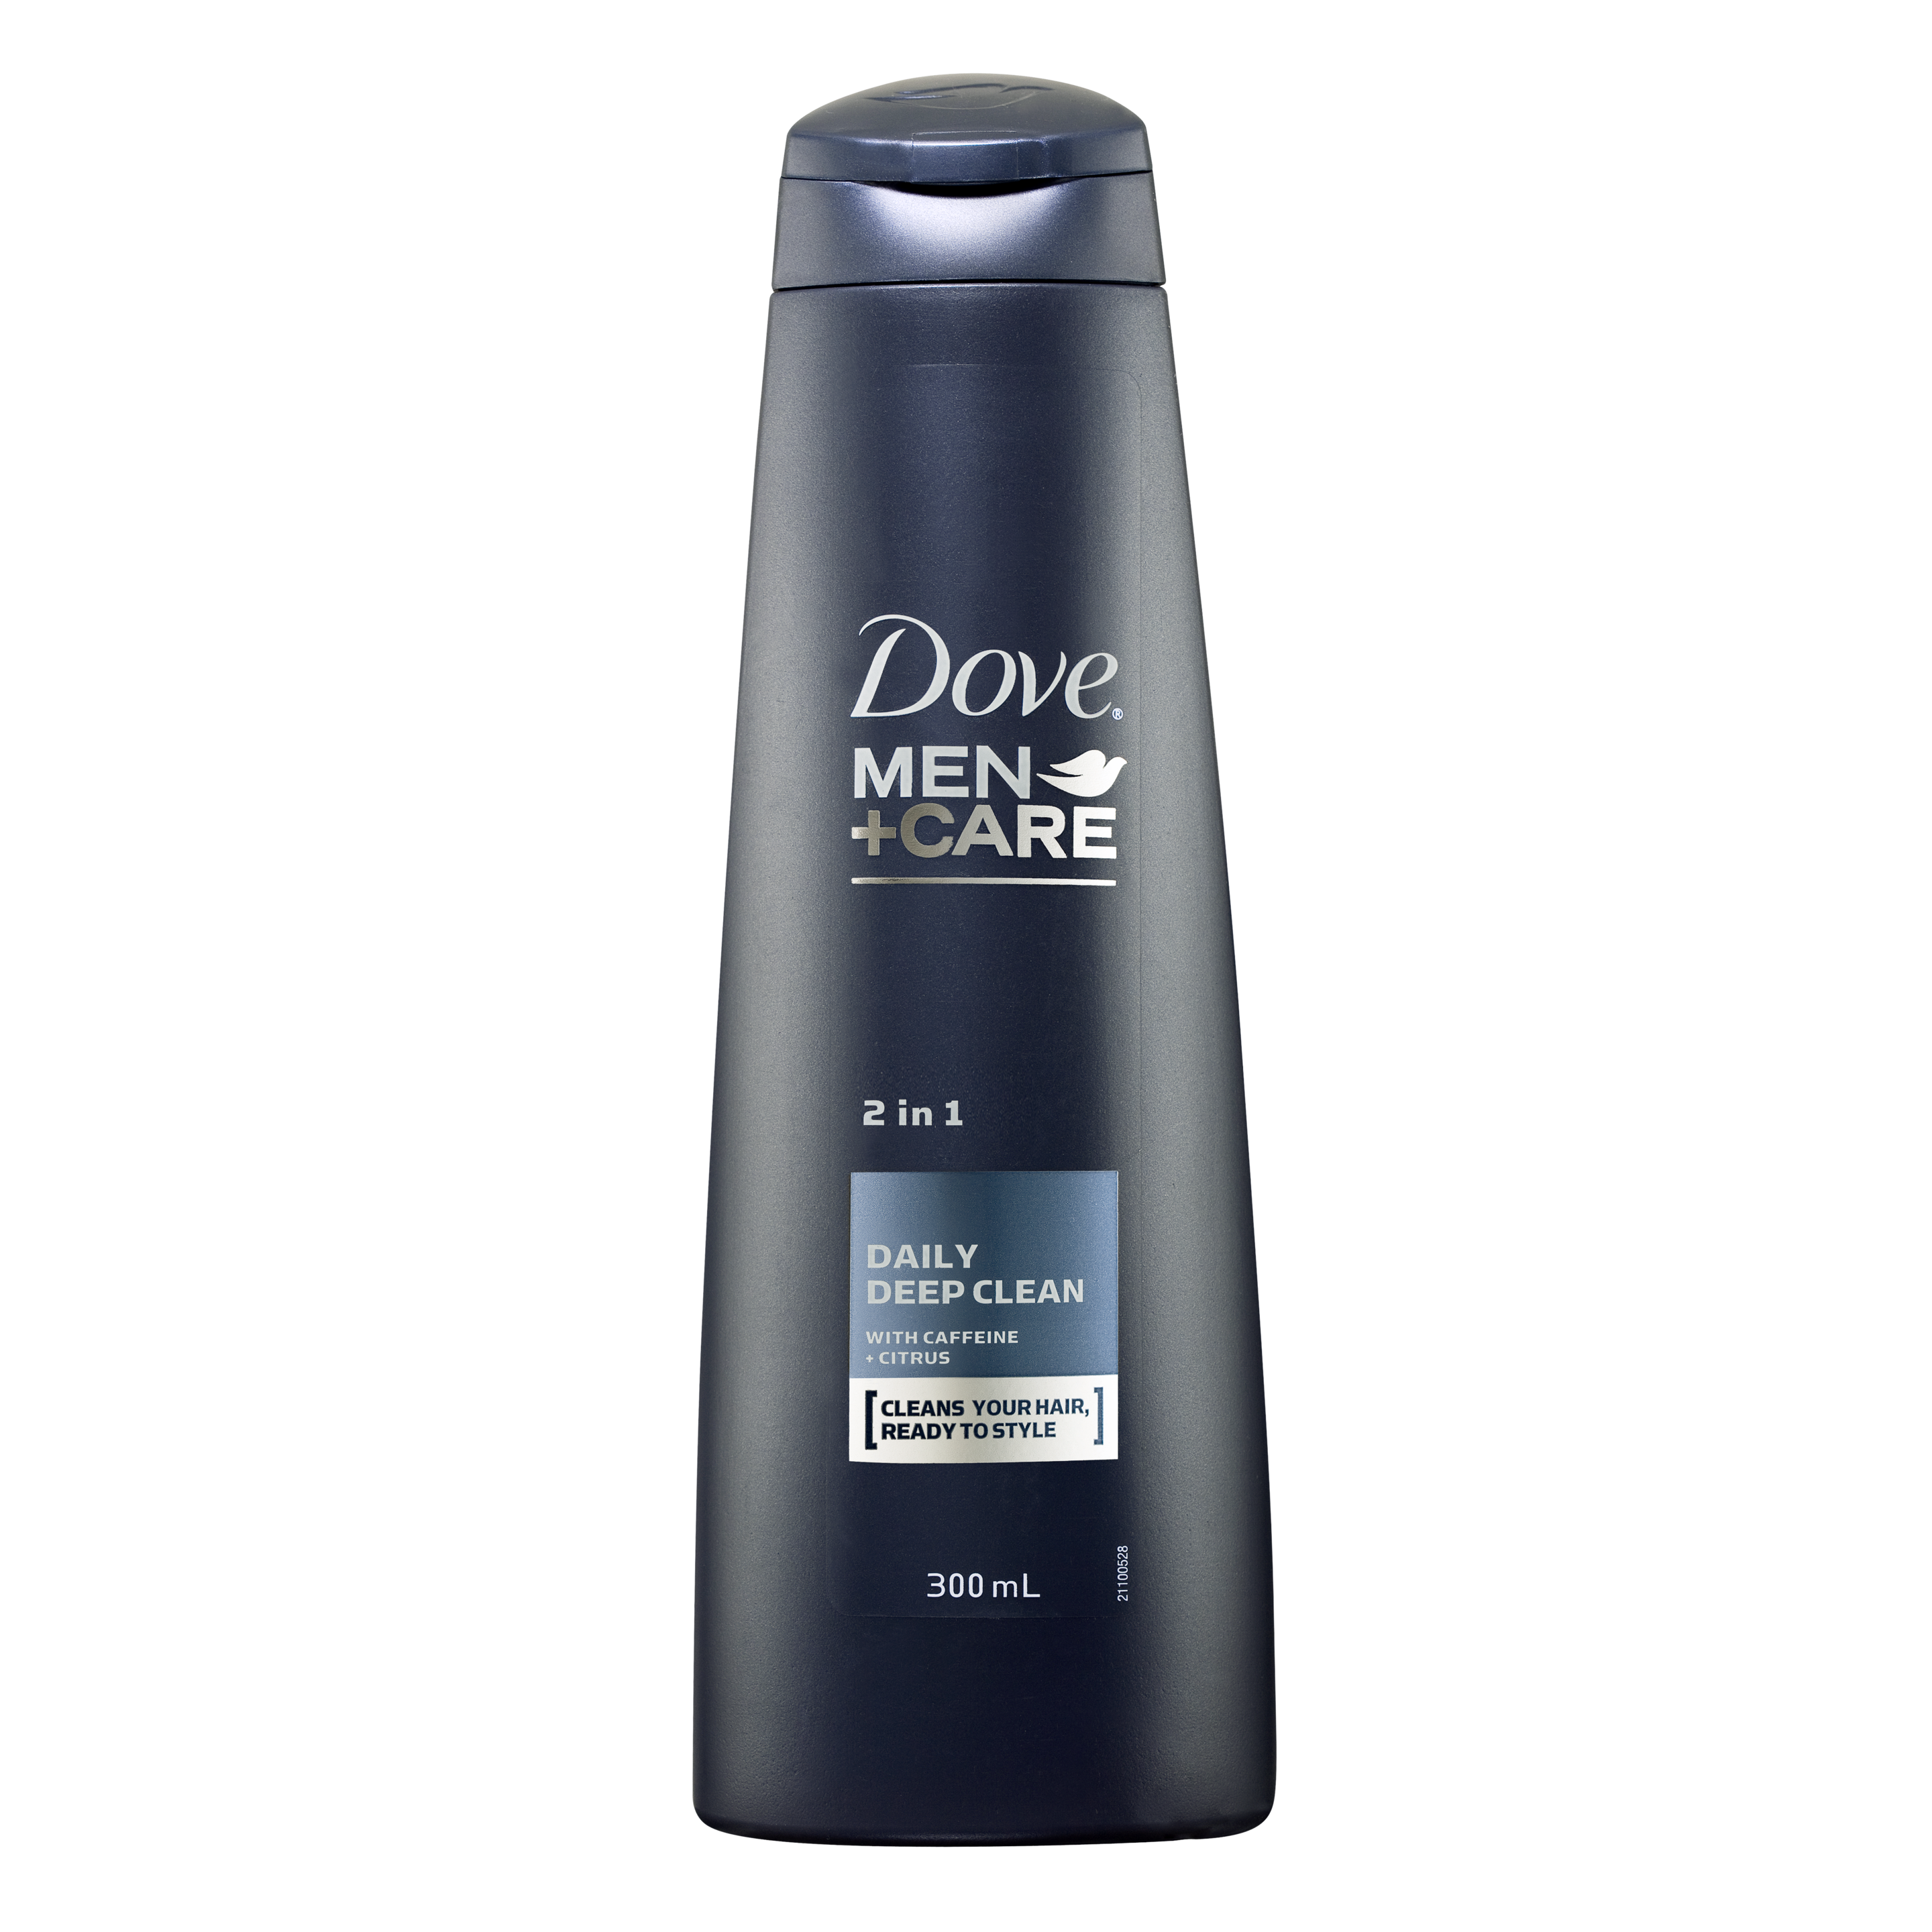 Dove Men+Care Daily Deep Clean Fortifying 2 in 1 Shampoo 300ml Text